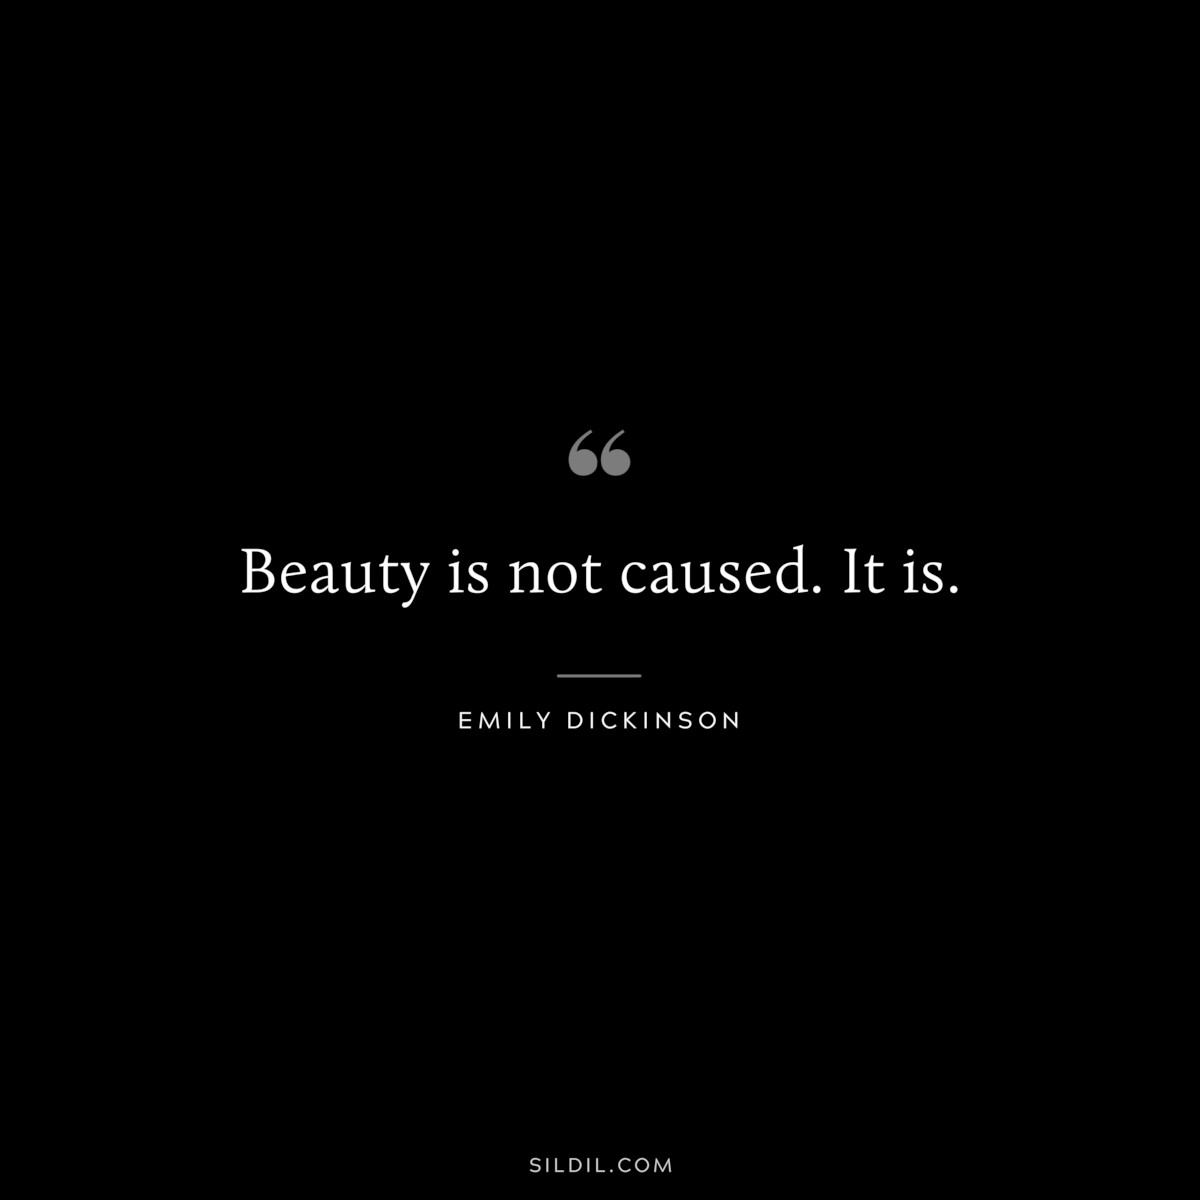 Beauty is not caused. It is.